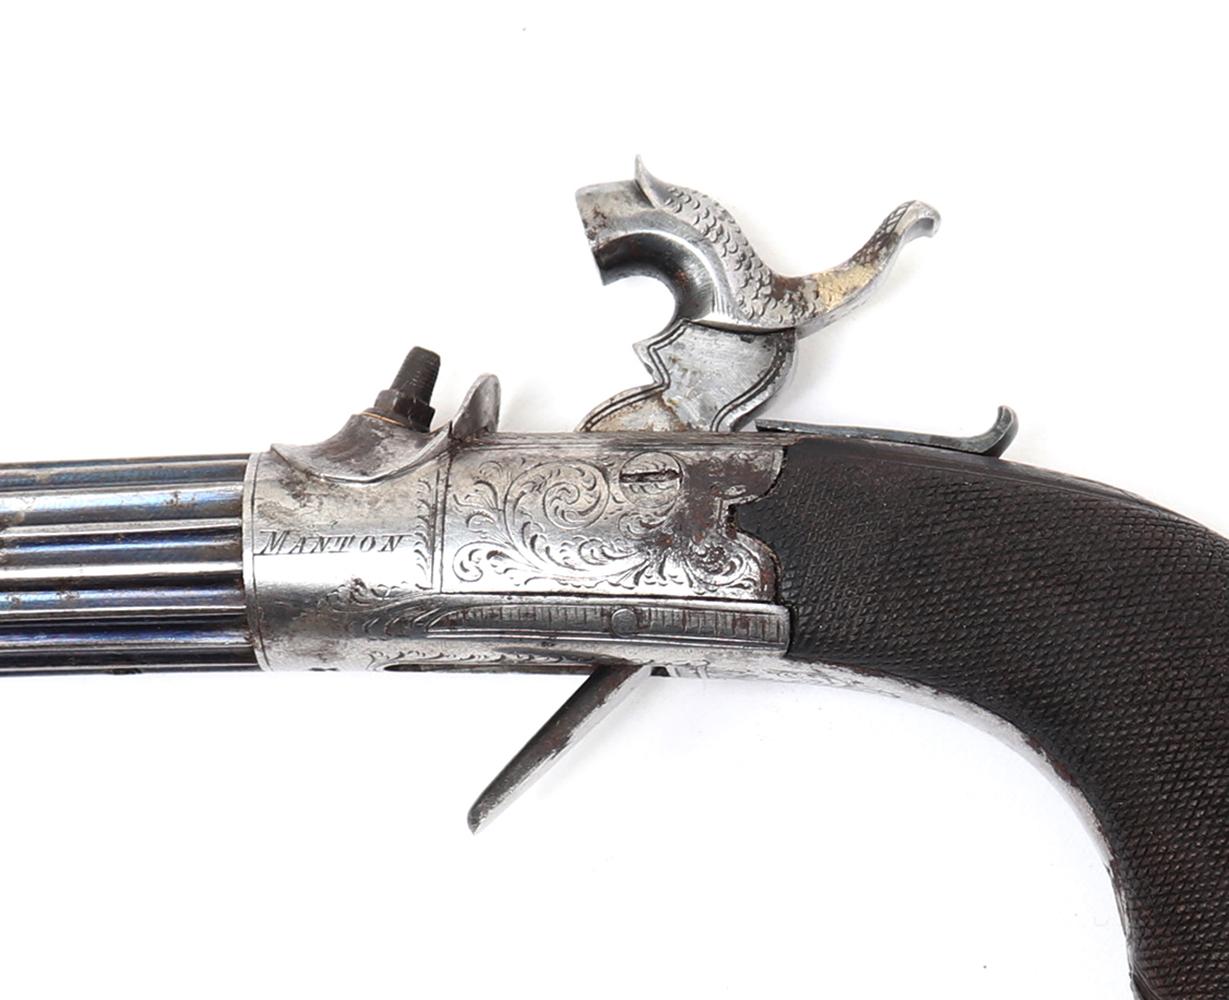 Excellent Pair of Silver, Fluted & Cased London Pistols by Manton